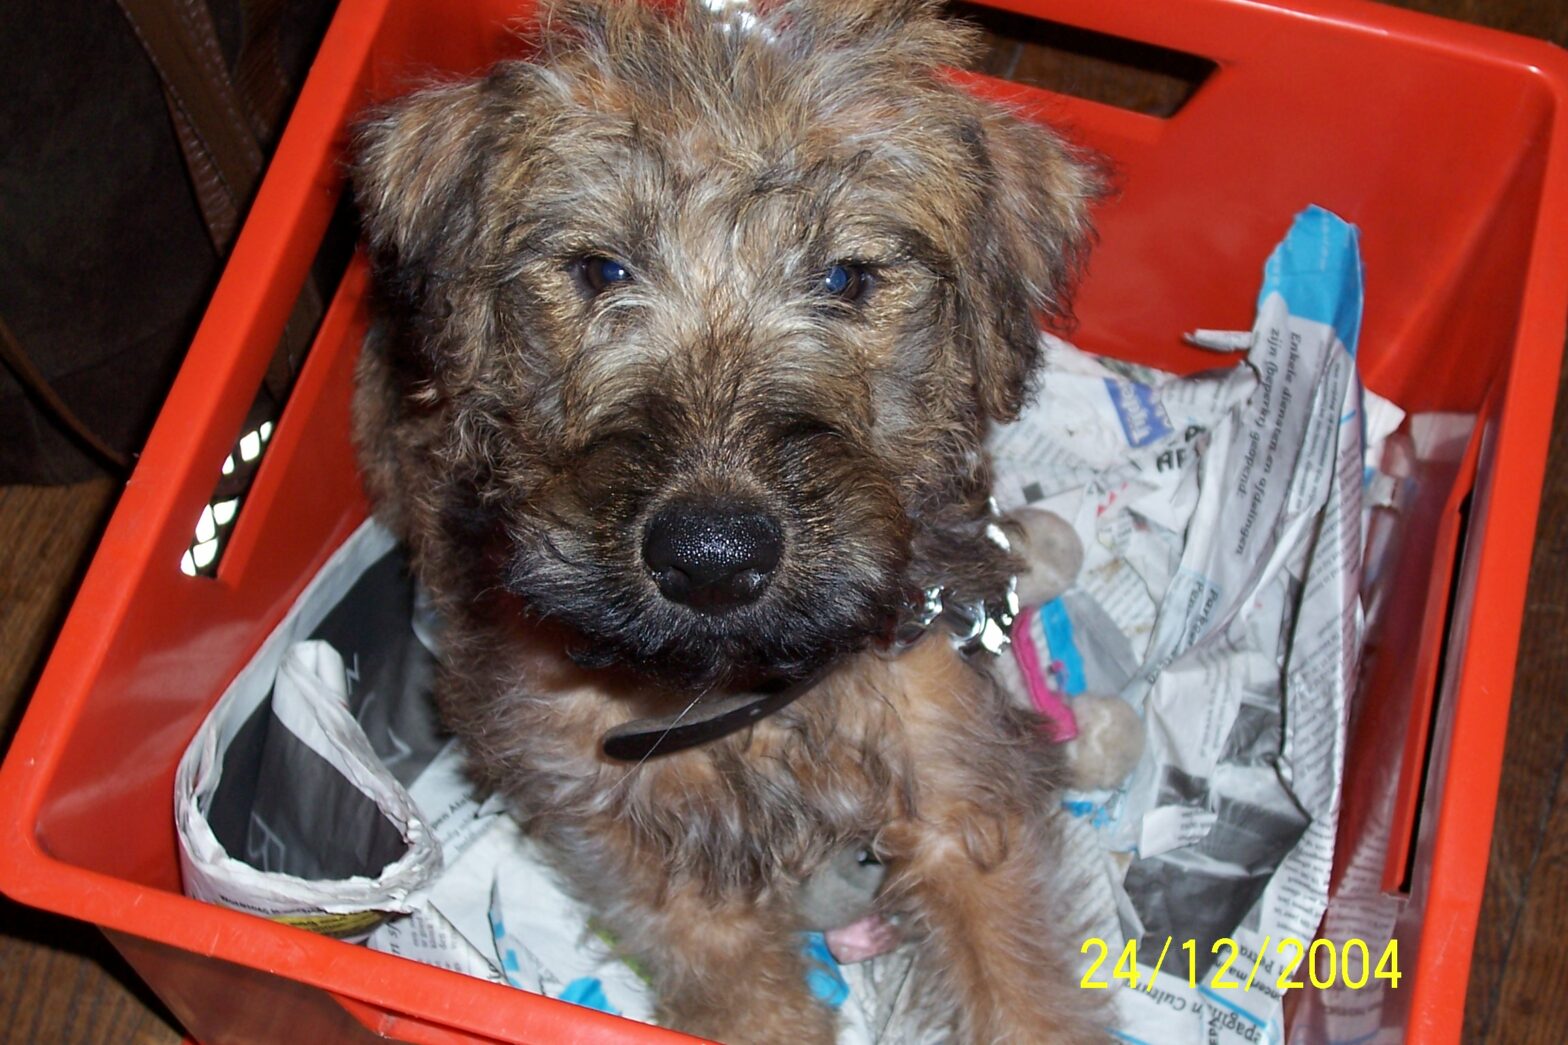 From the dog breed Irish terrier, Gnof as a puppy, sitting in a red plastic box lined with newspaper on his way to our home, and looking up at the camera